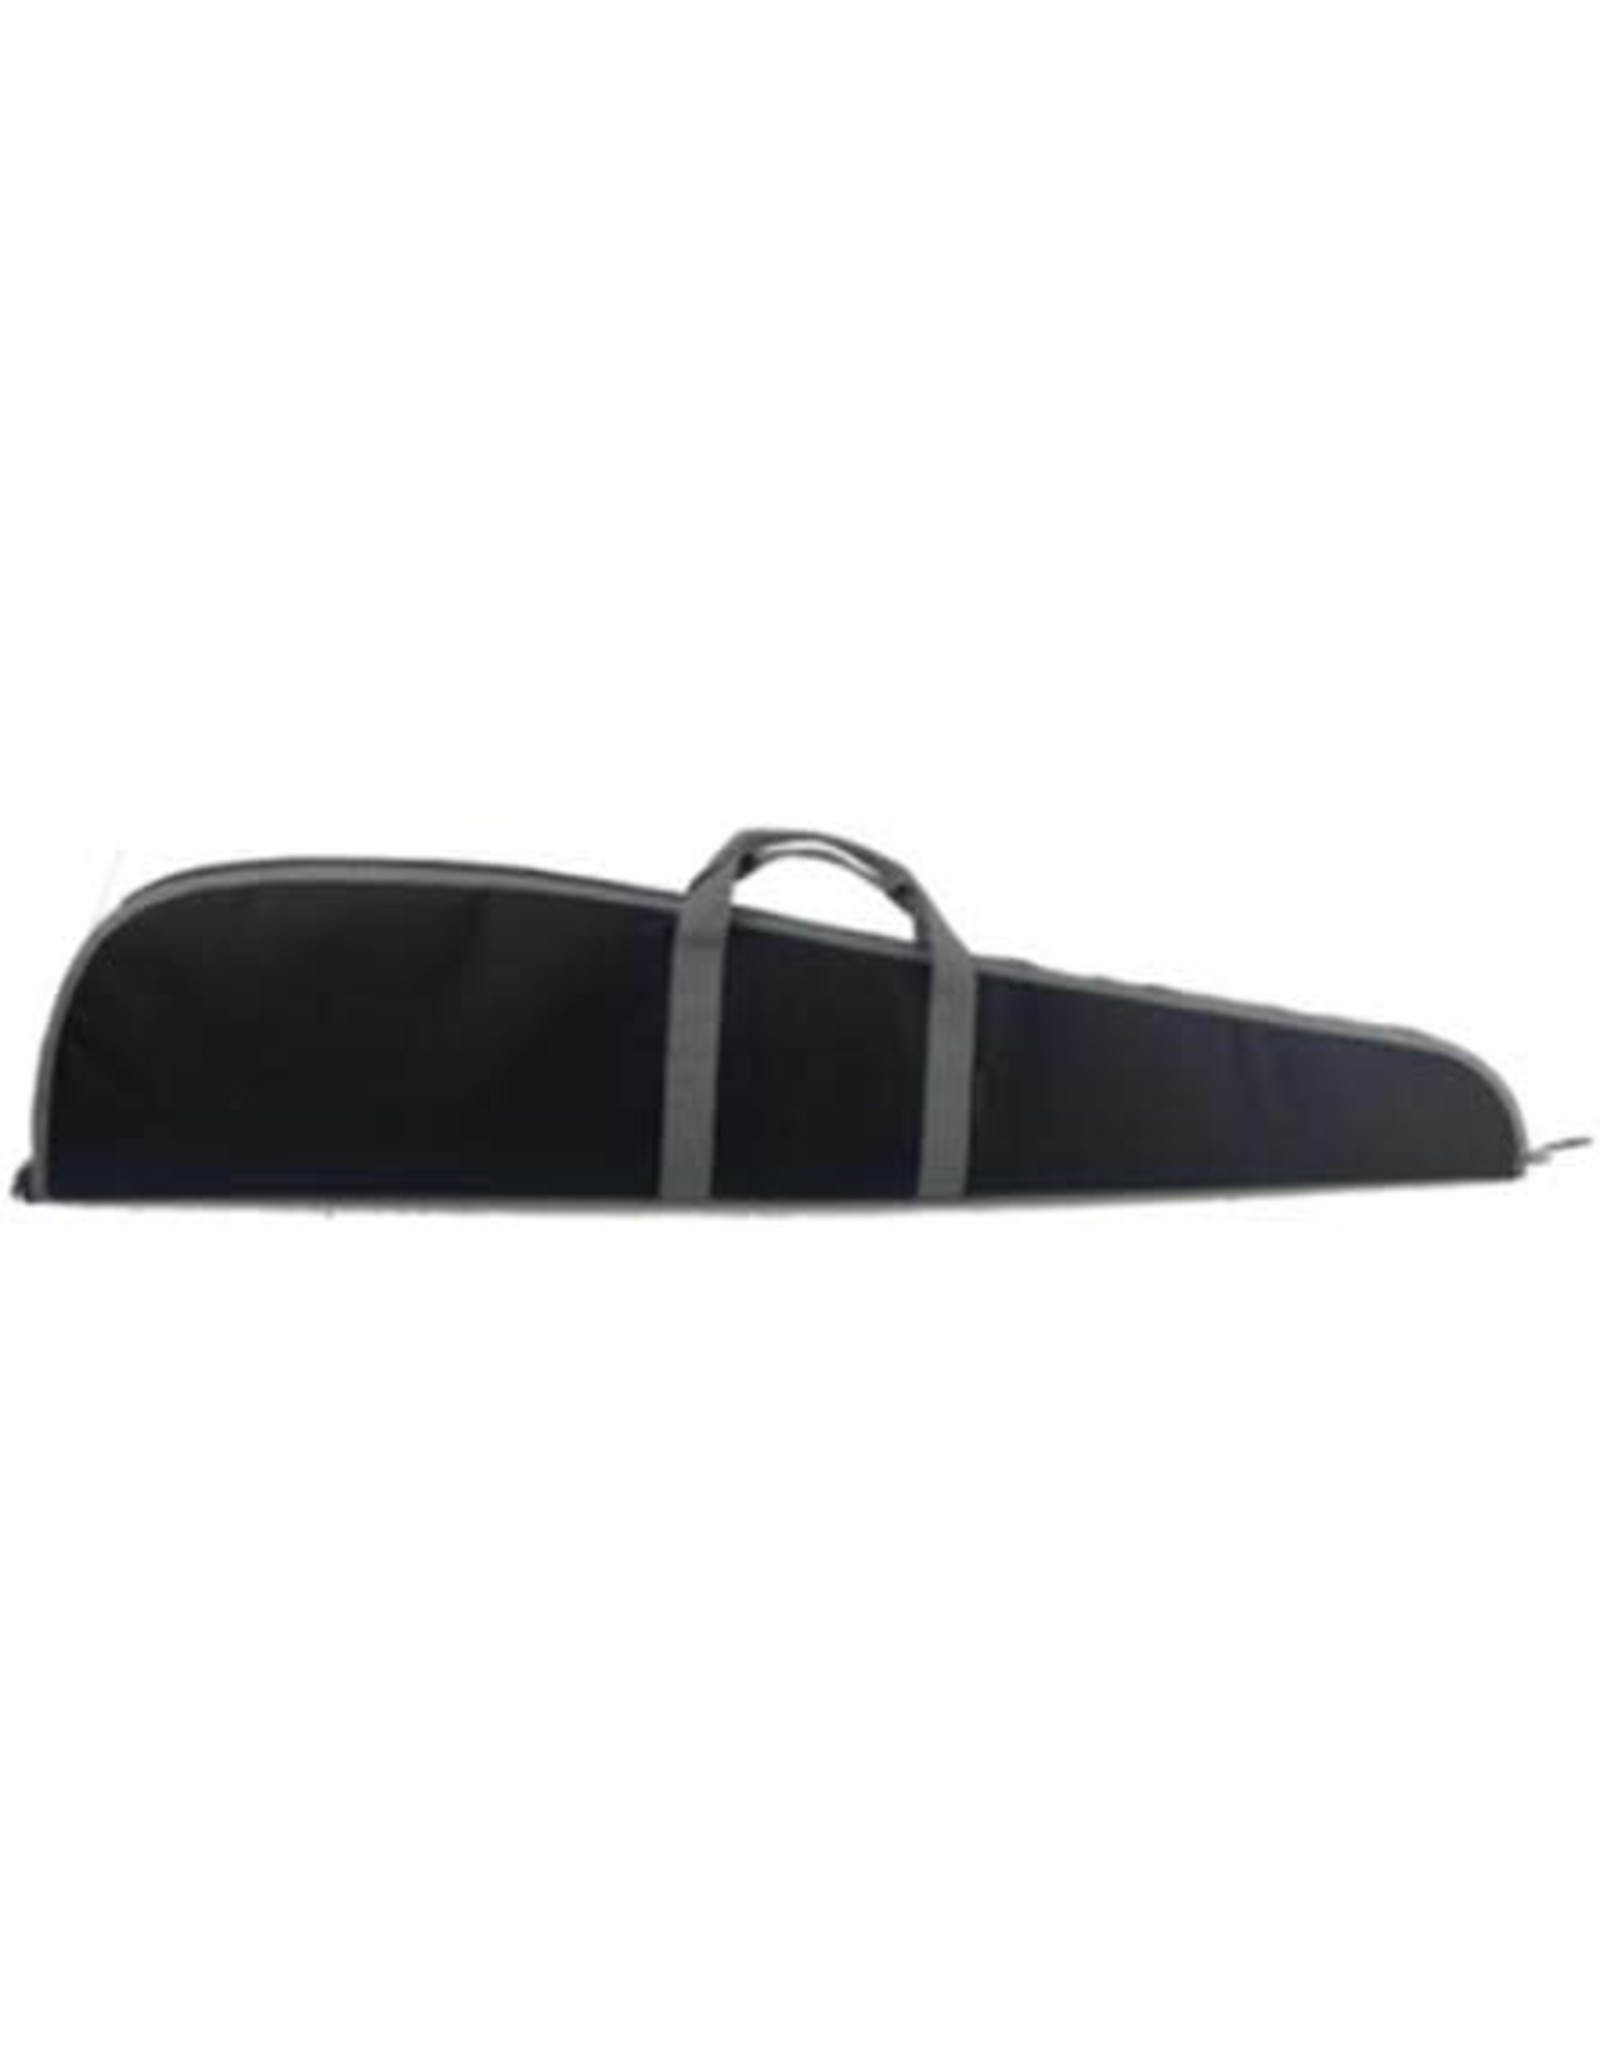 HQ OUTFITTERS HQO GUN CASE BLK/GRY